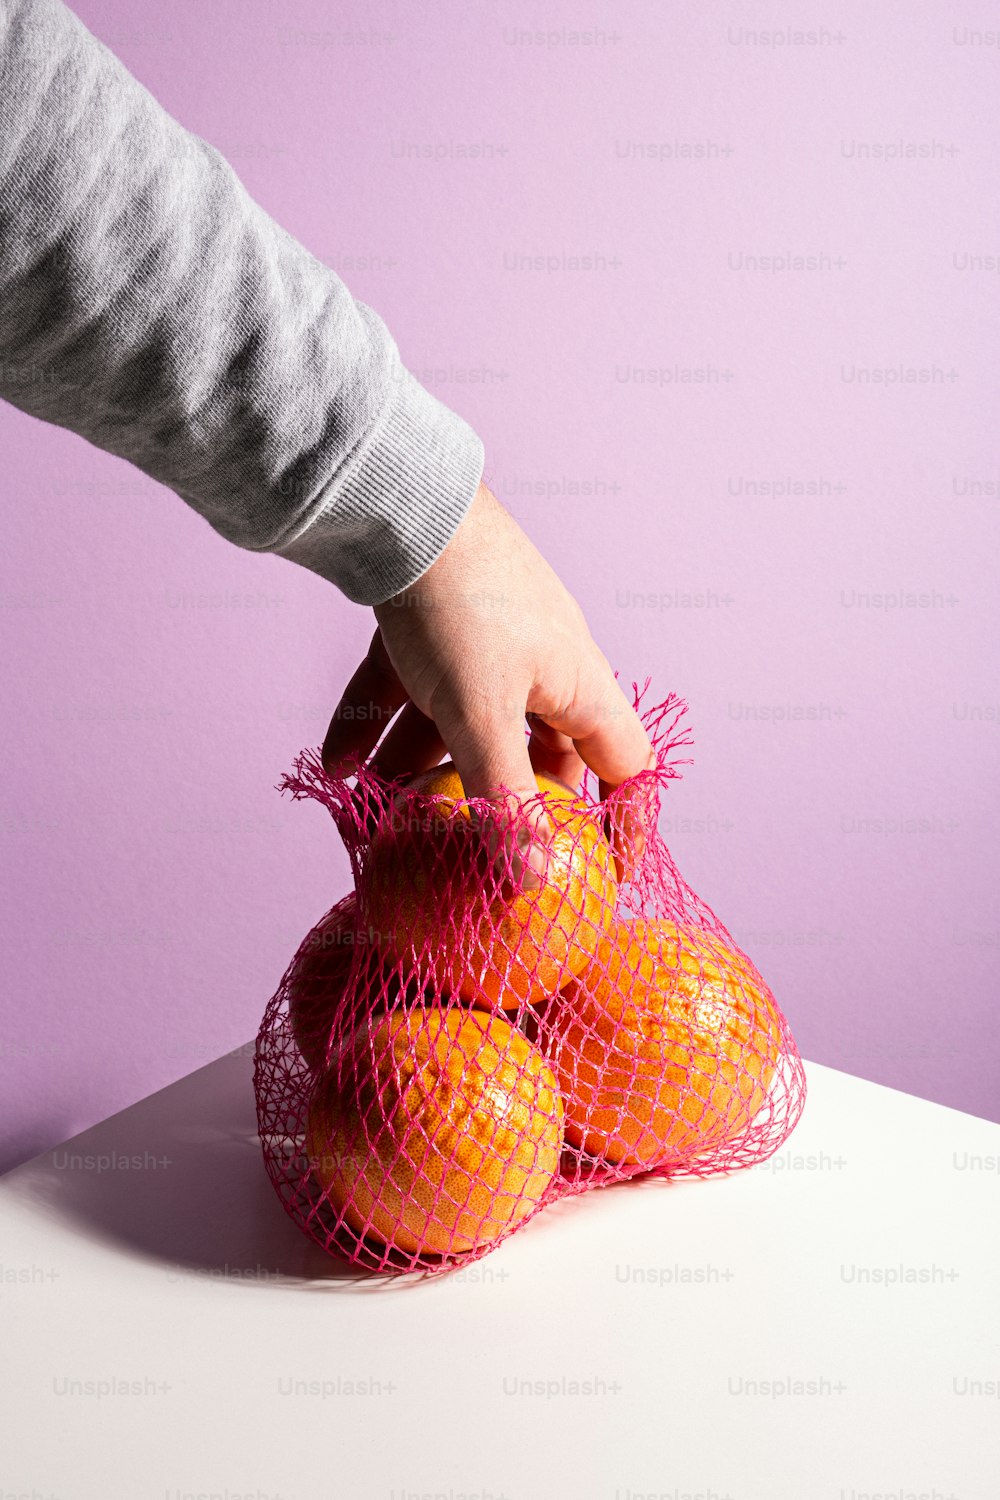 a person holding a bag of oranges on a table